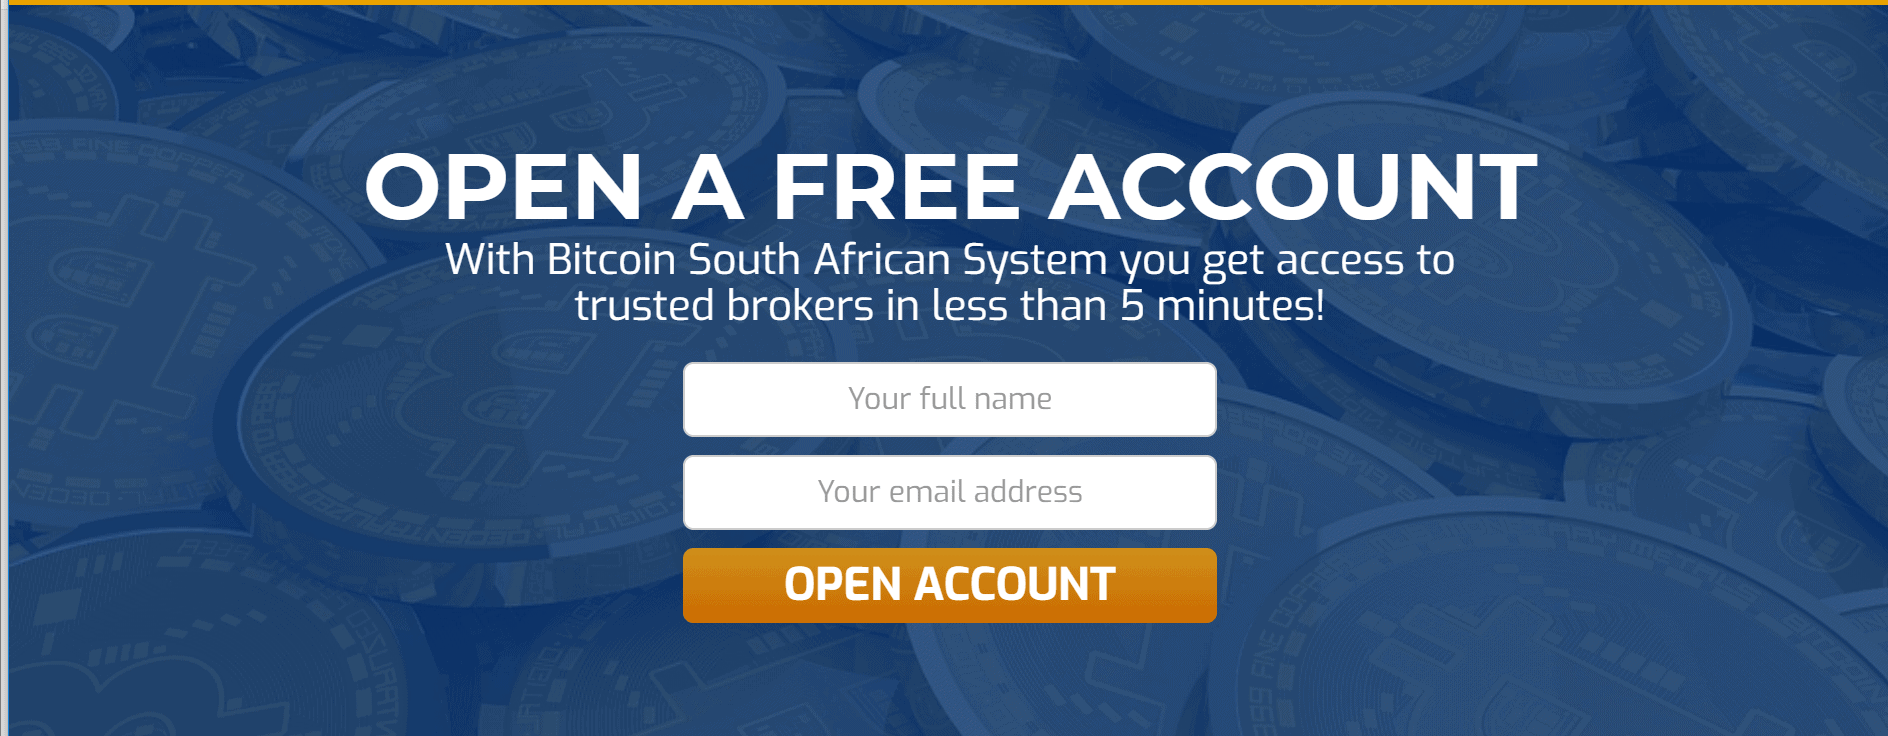 Bitcoin South African System Scam Or Legit Results 2020